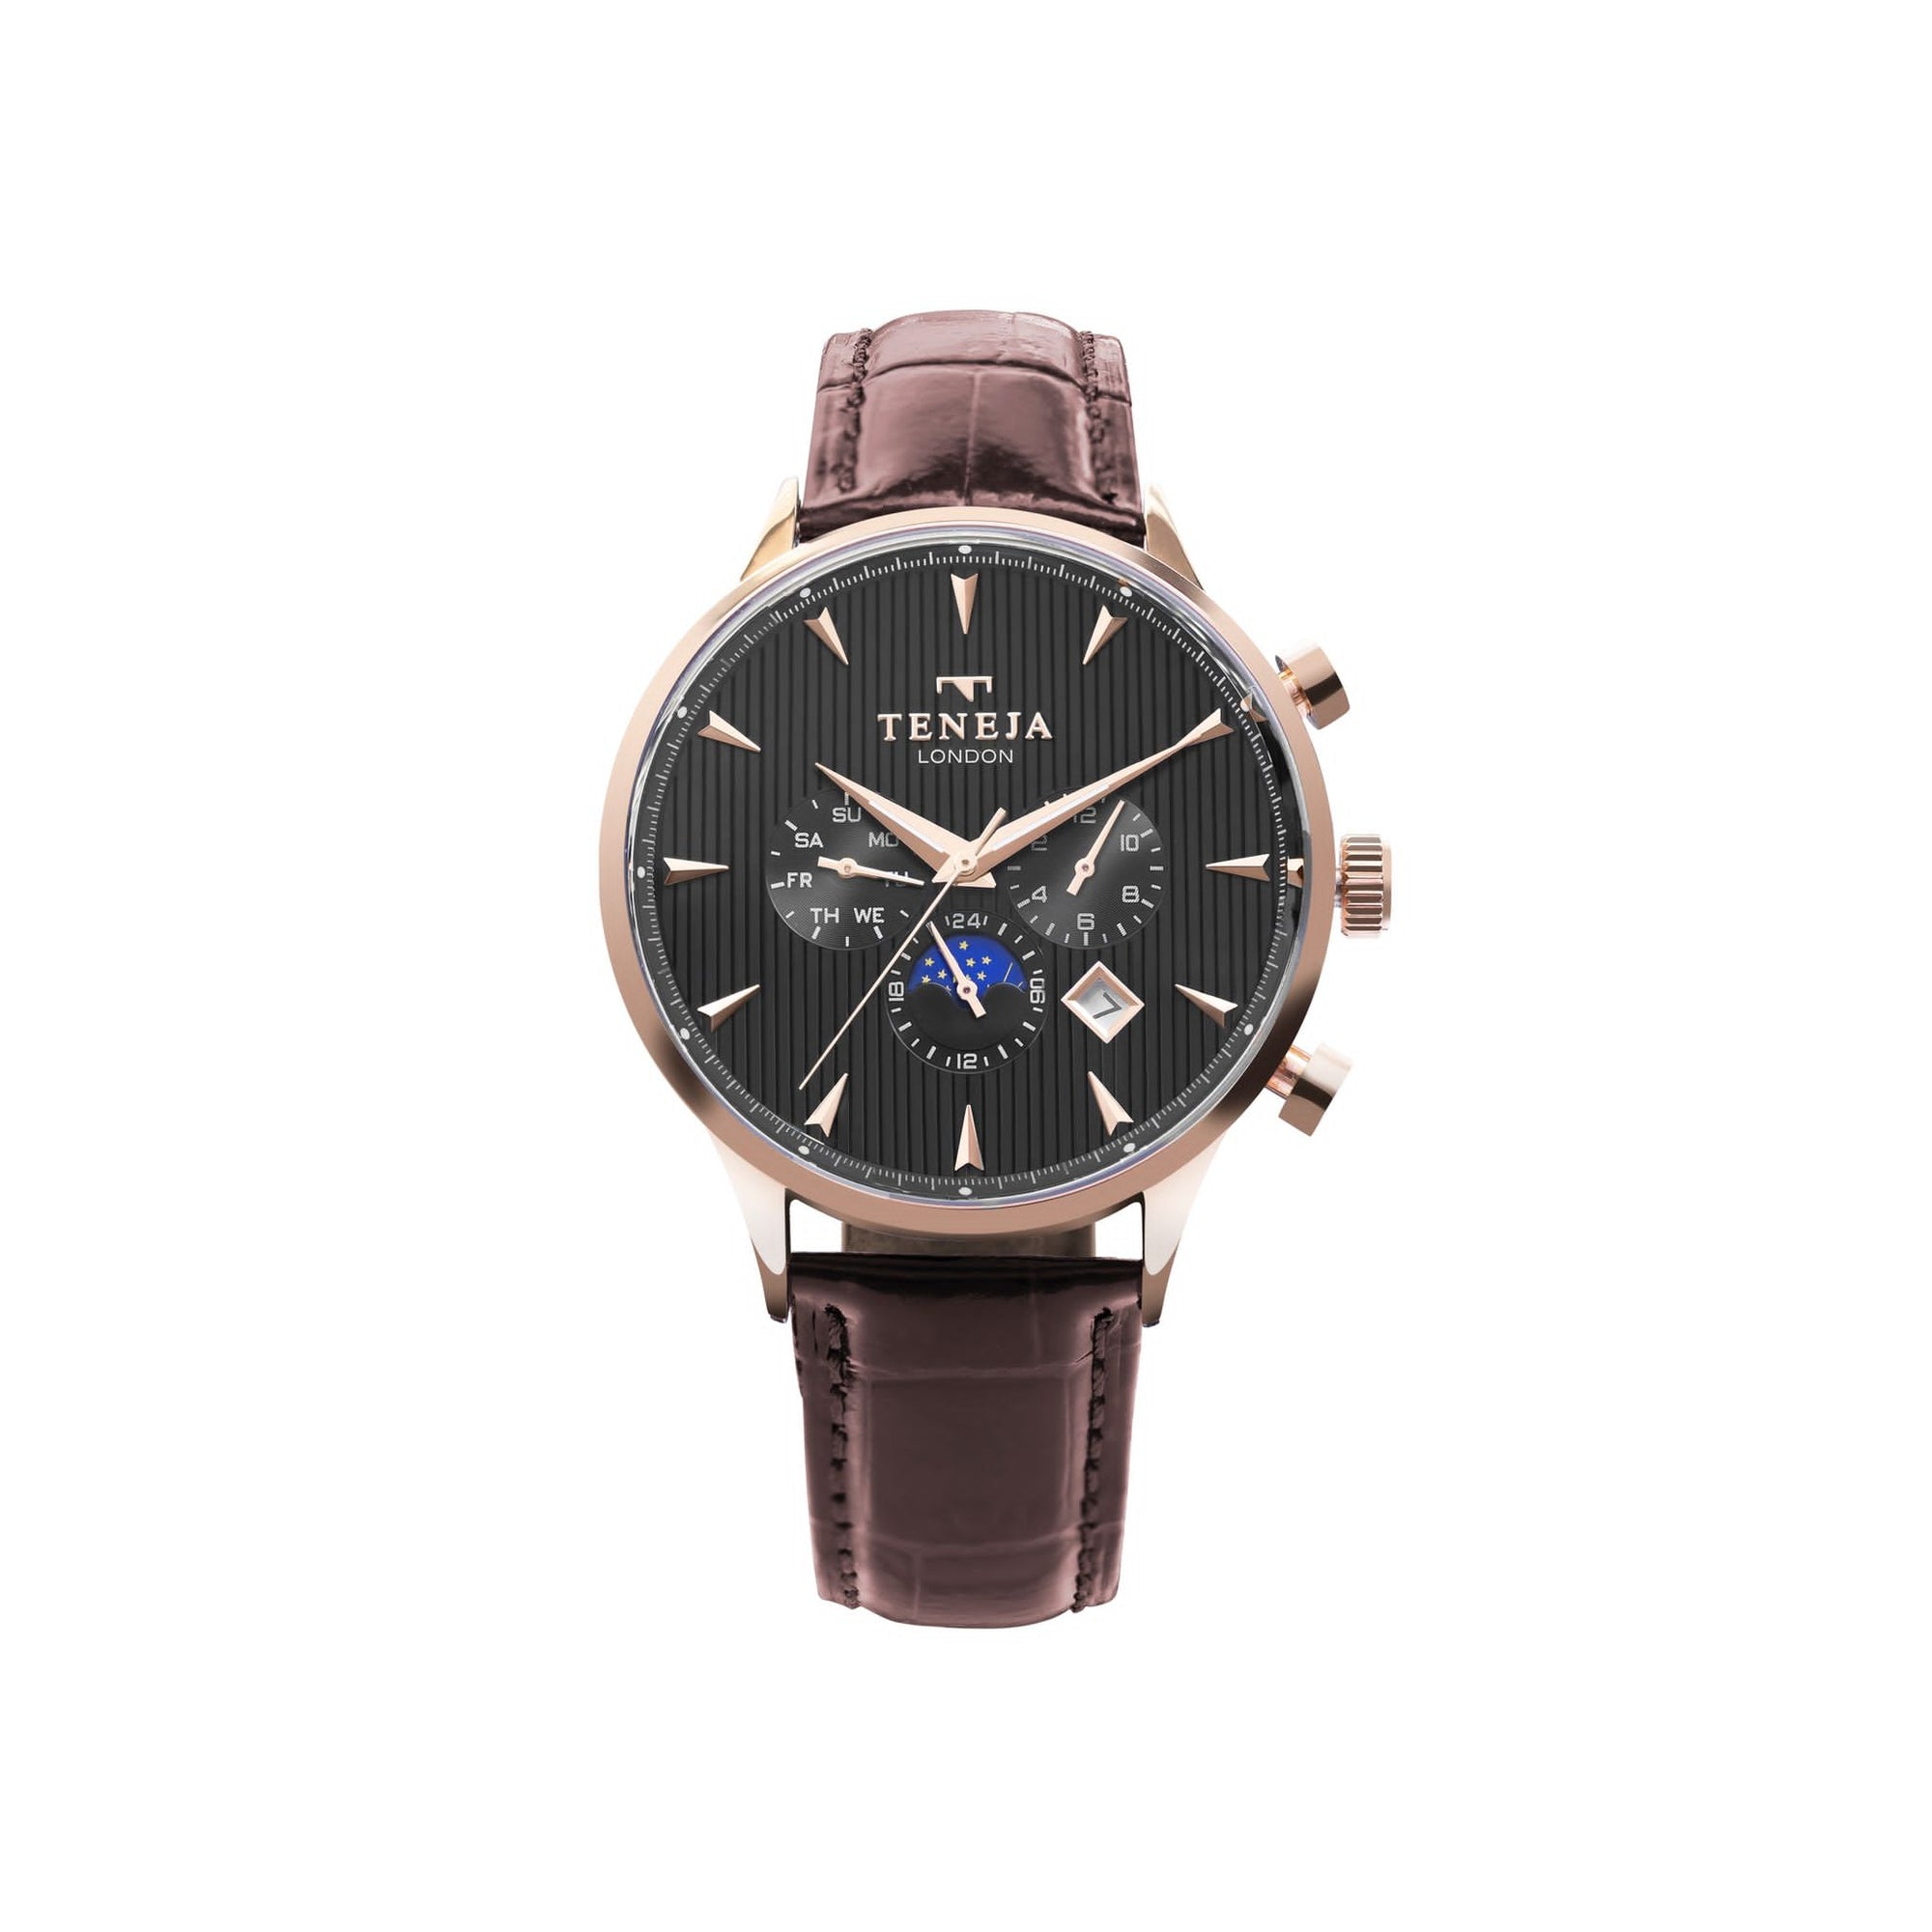 The Harp Black and Rose Gold Automatic